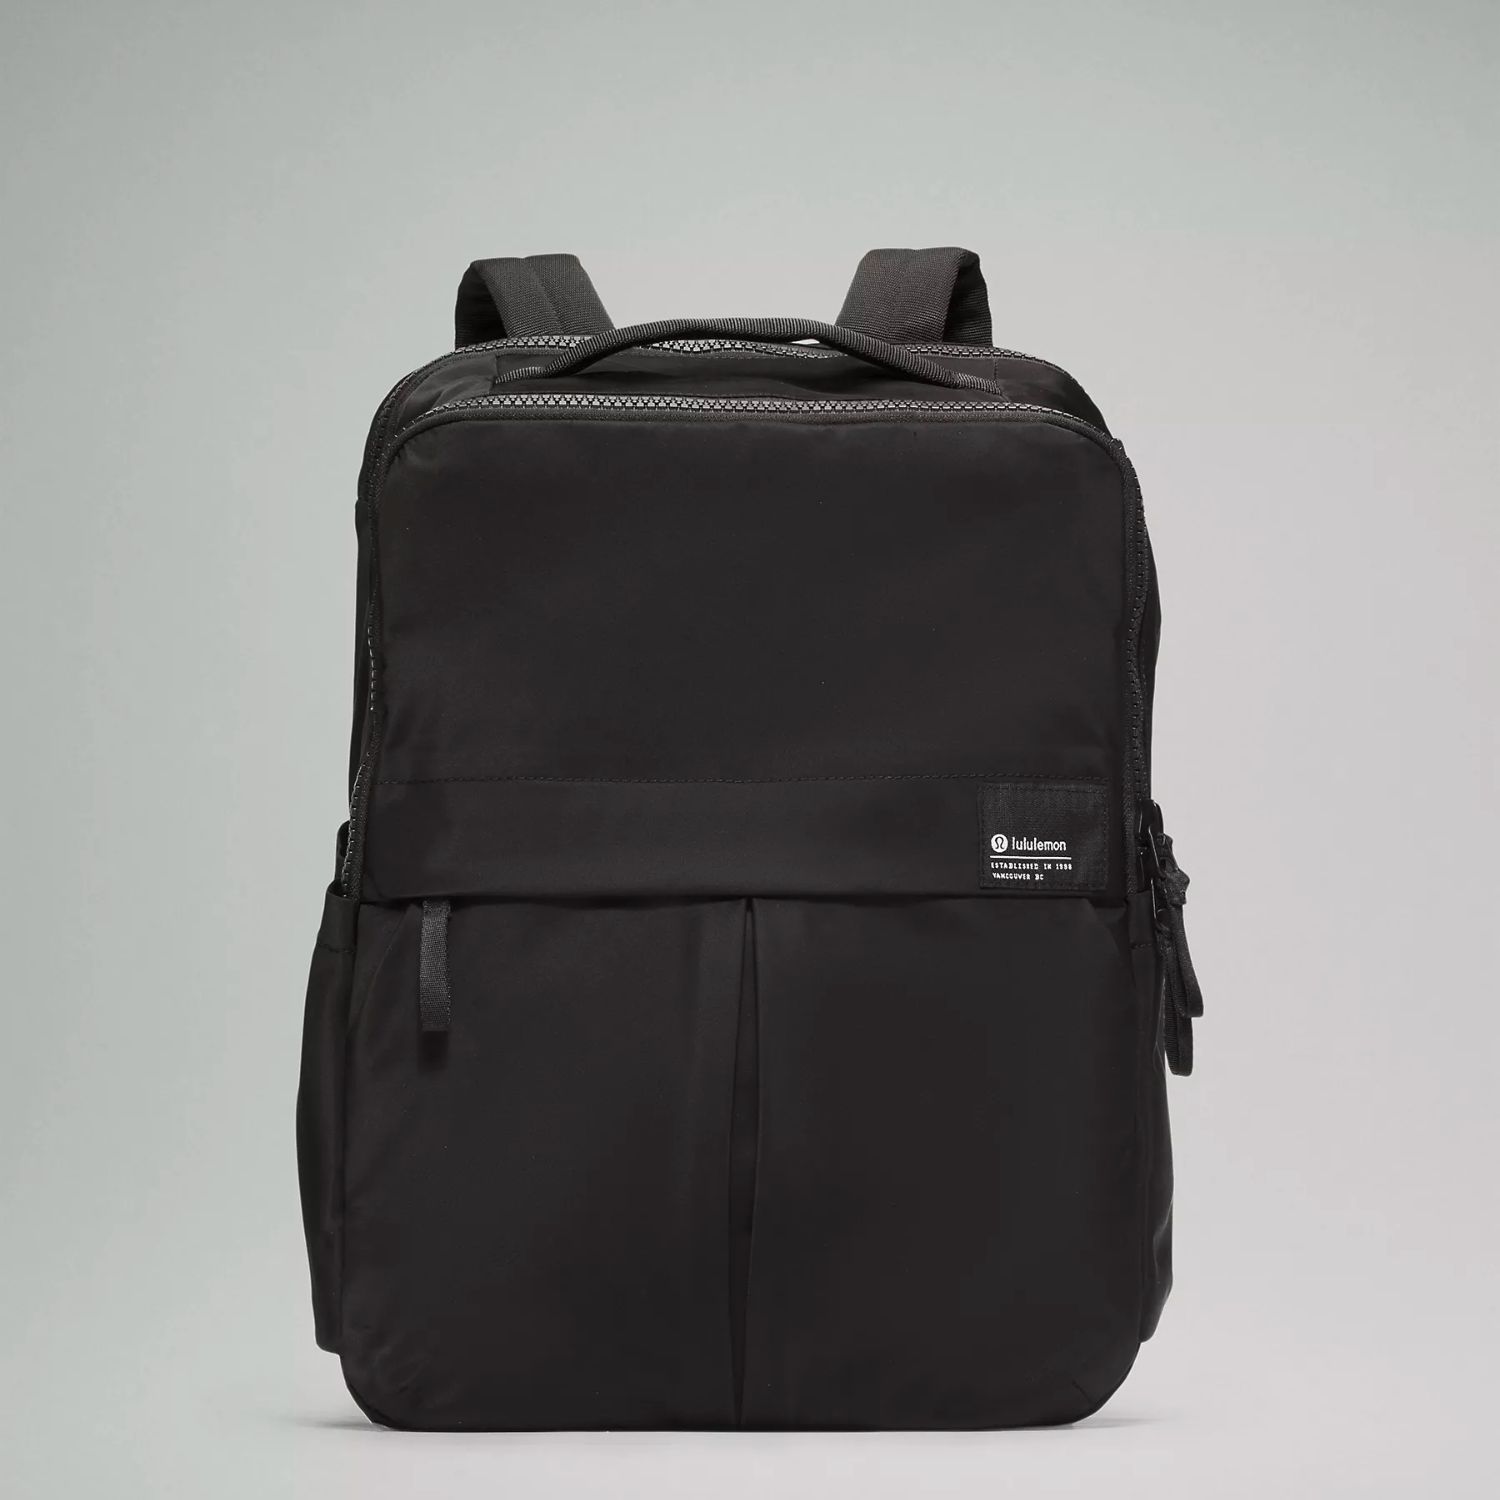 The Best Gifts for College Students: Laptop Backpack